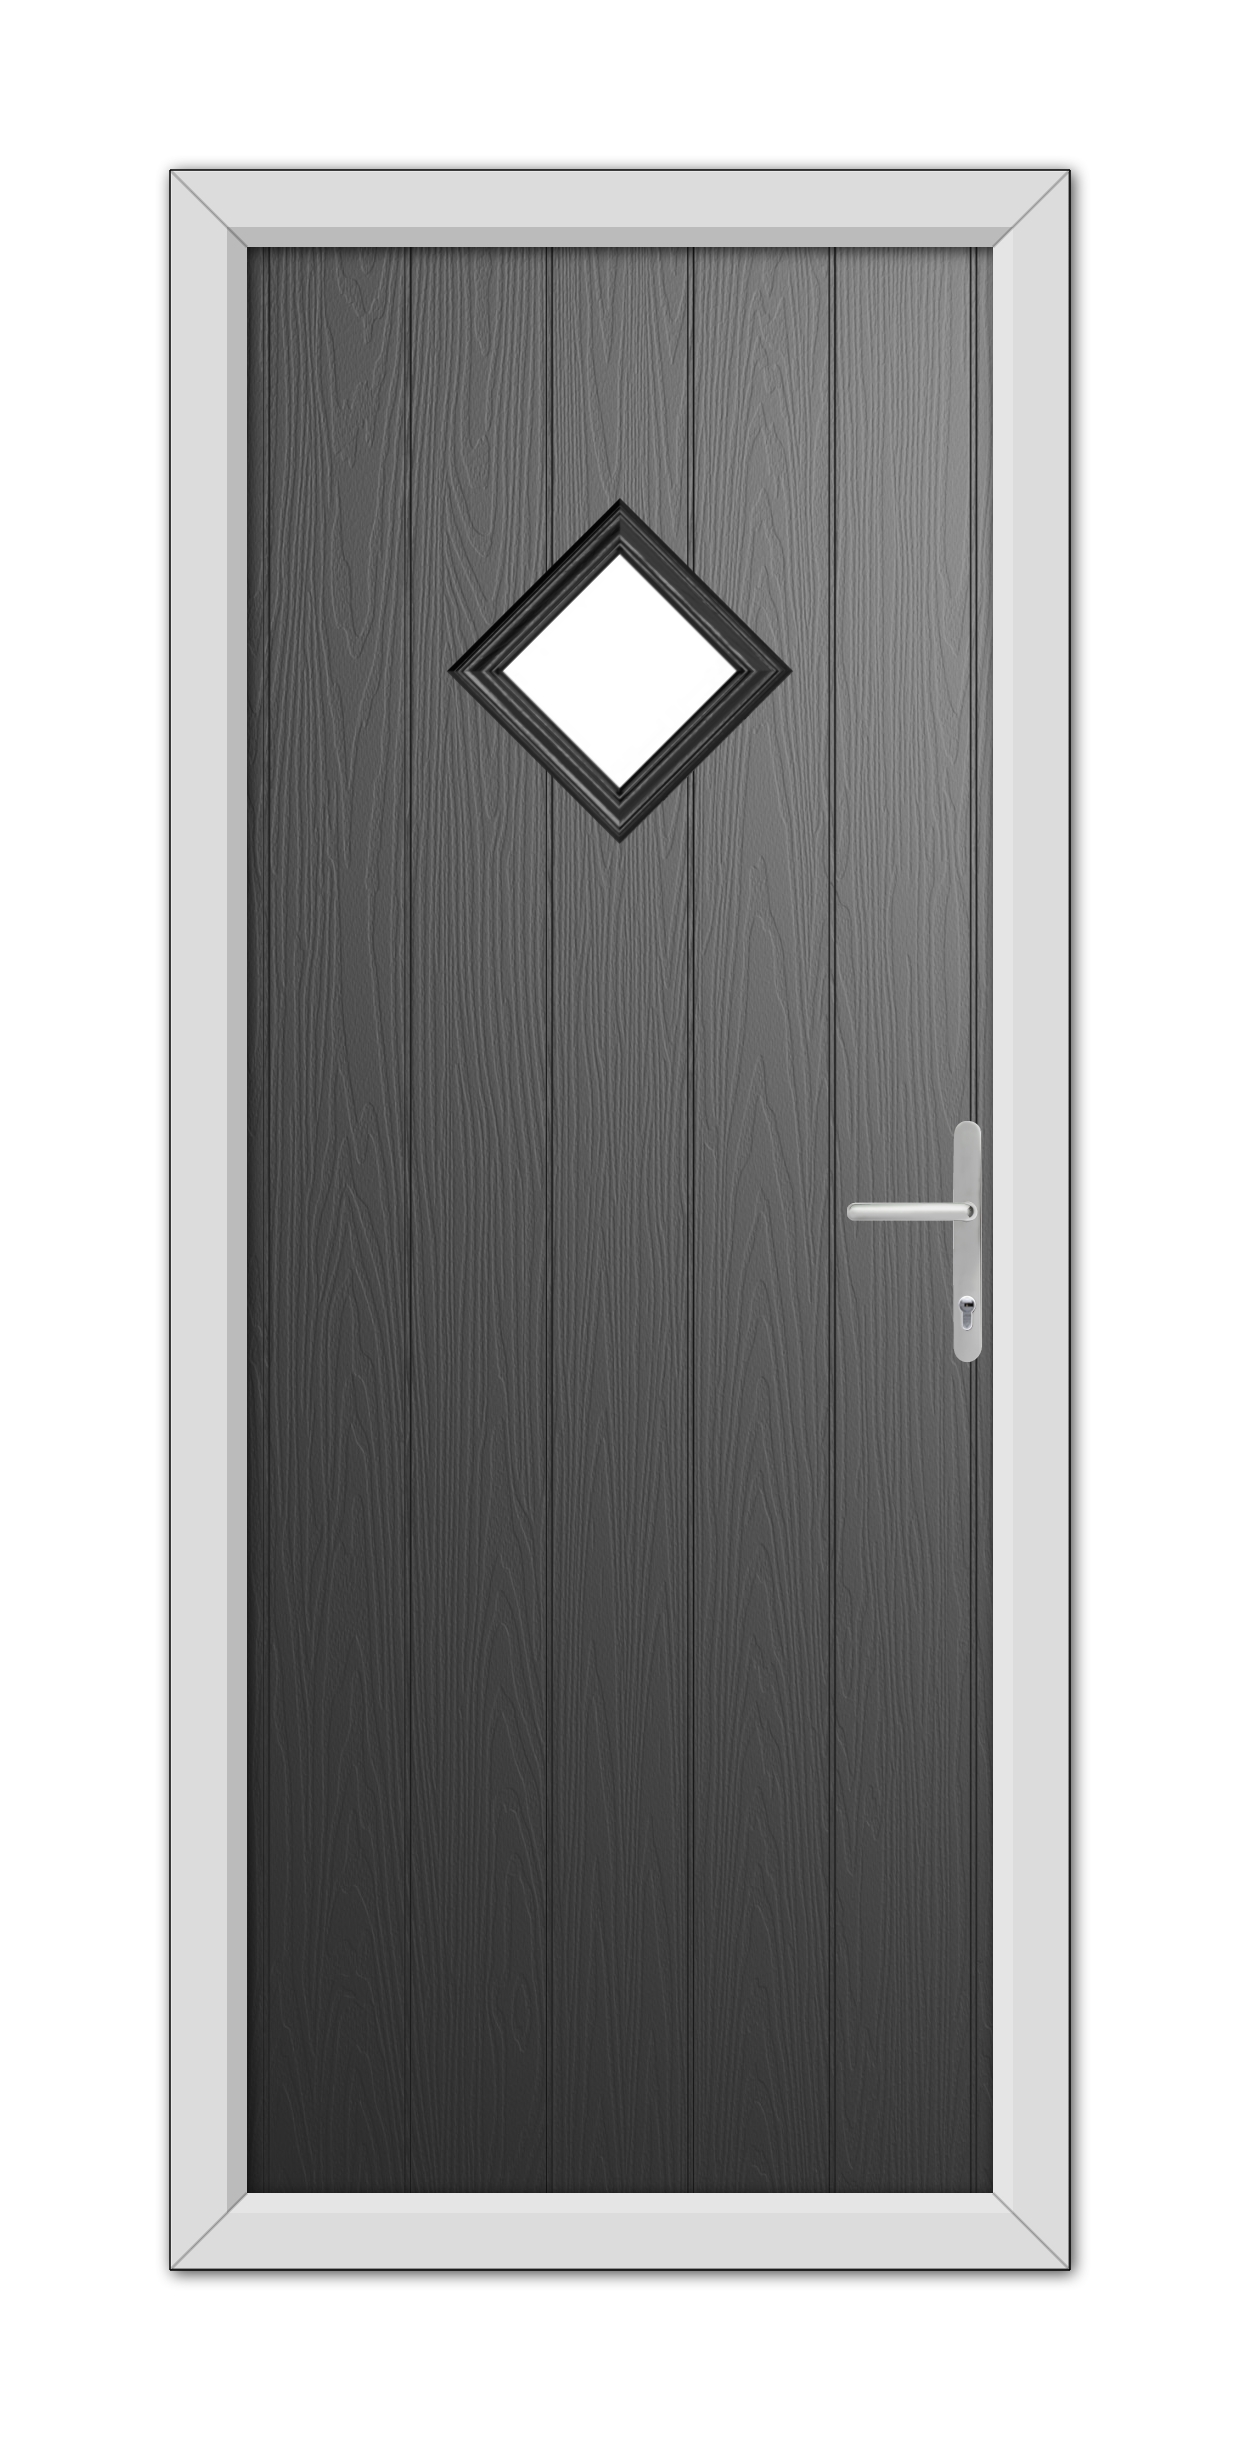 A Black Cornwall Composite Door 48mm Timber Core with a diamond-shaped window and a metal handle, set within a white door frame.